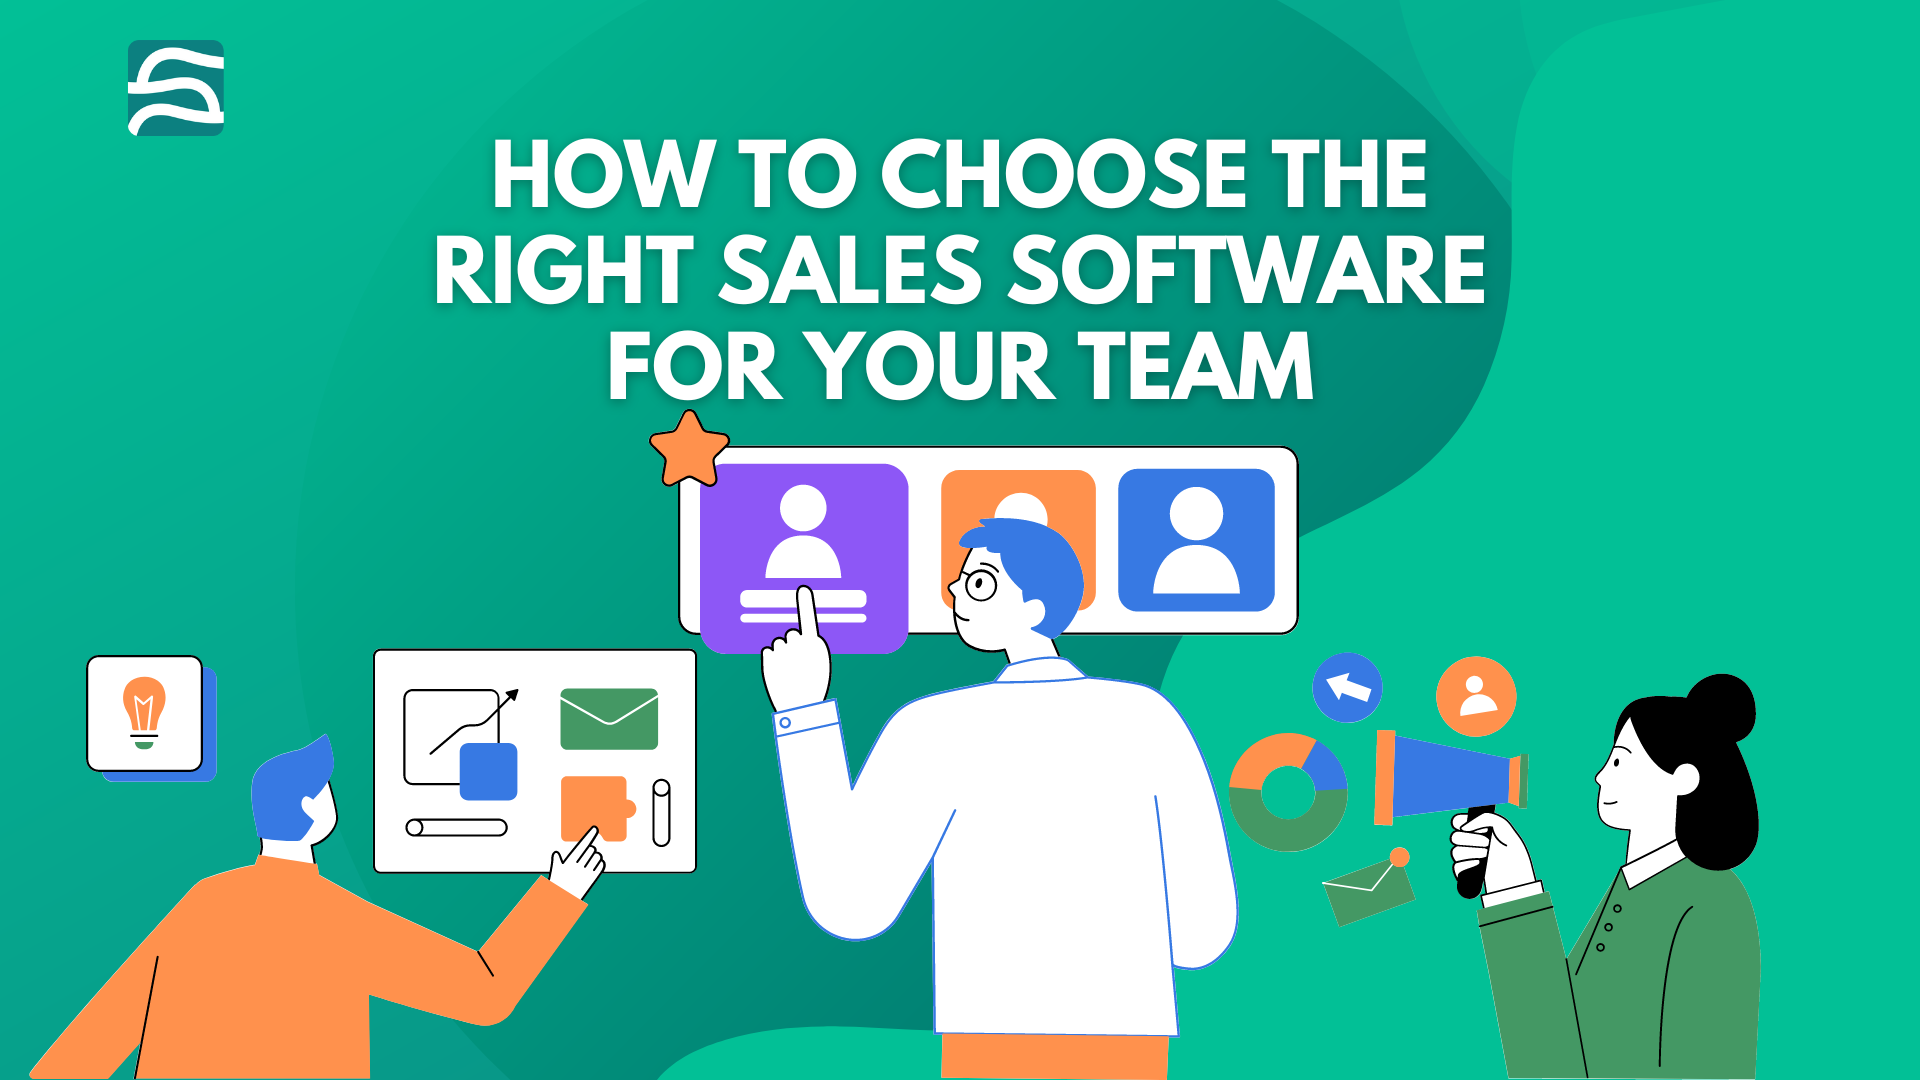 sales software: How to Choose the Right Sales Software for Your Team